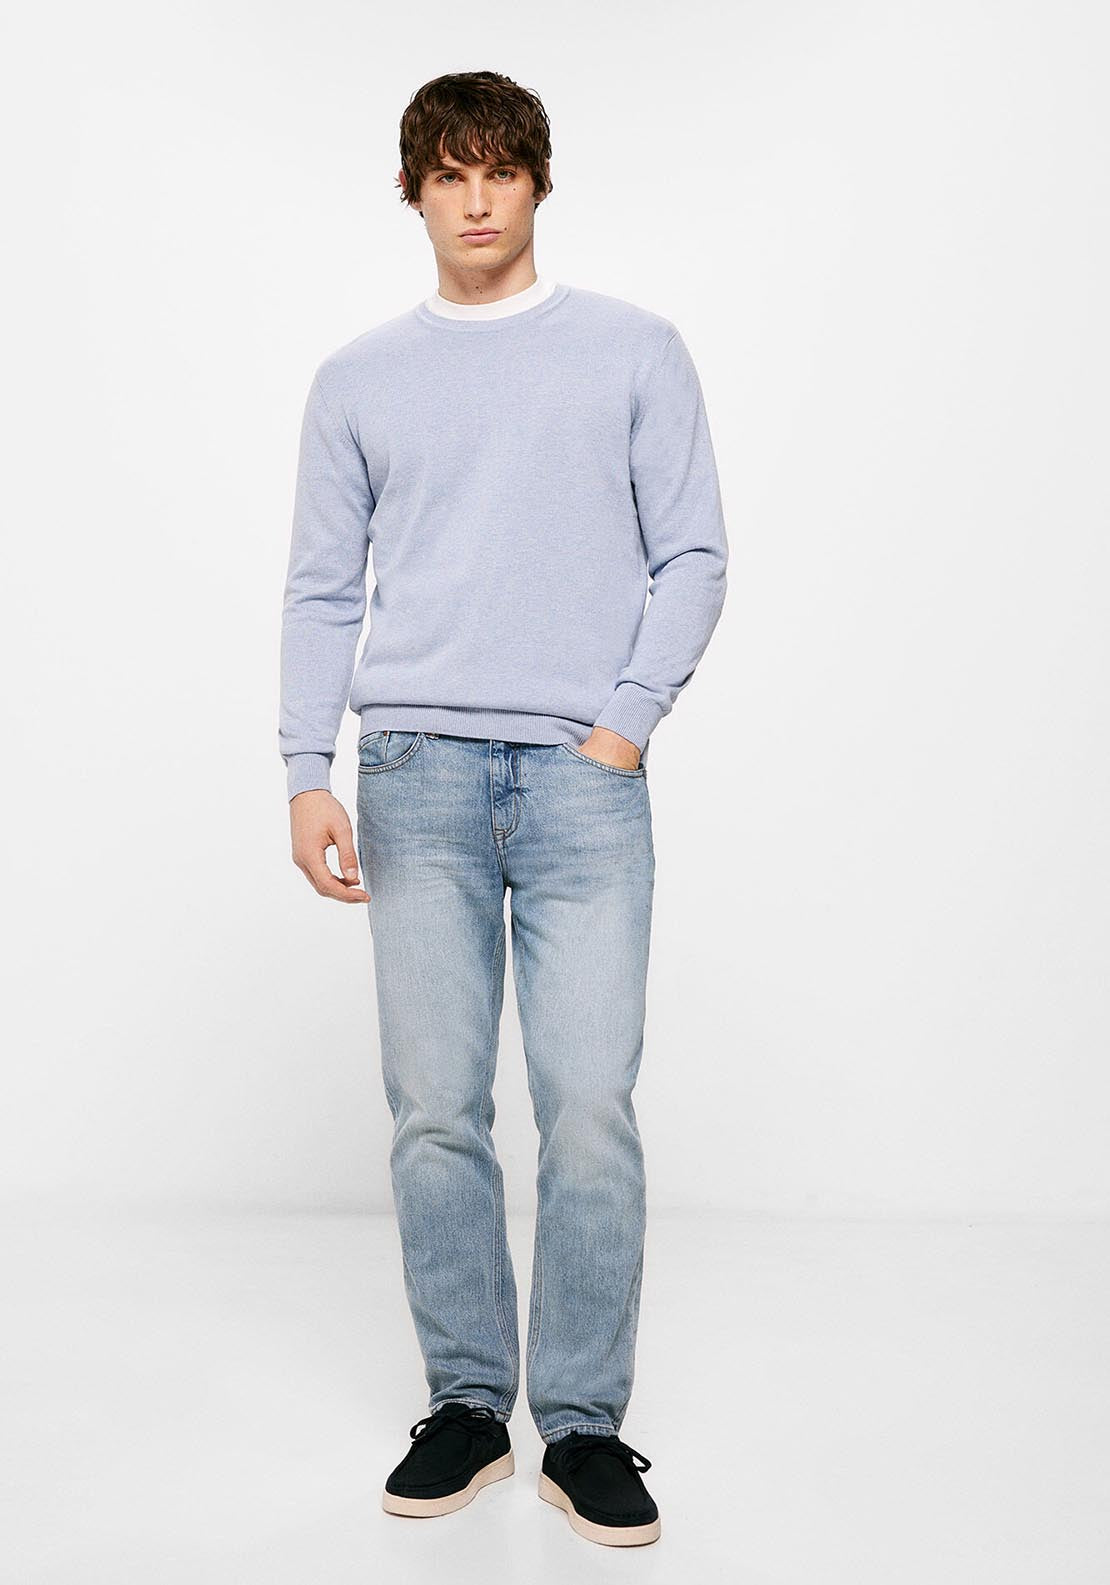 Springfield Essential jumper with elbow patches - Blue 4 Shaws Department Stores